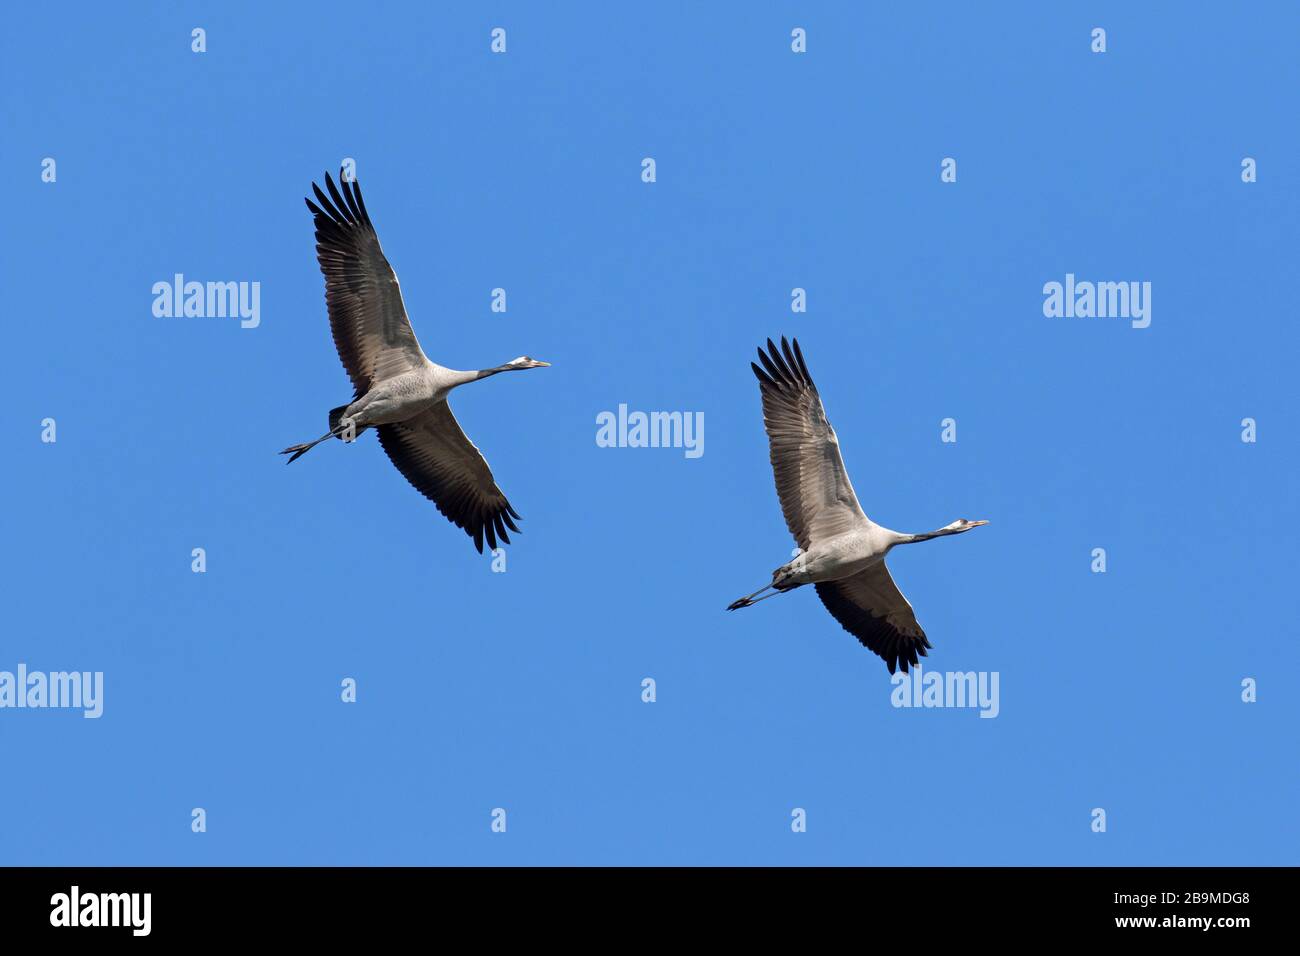 Two migrating common cranes / Eurasian crane (Grus grus) flying / thermal soaring against blue sky during migration Stock Photo